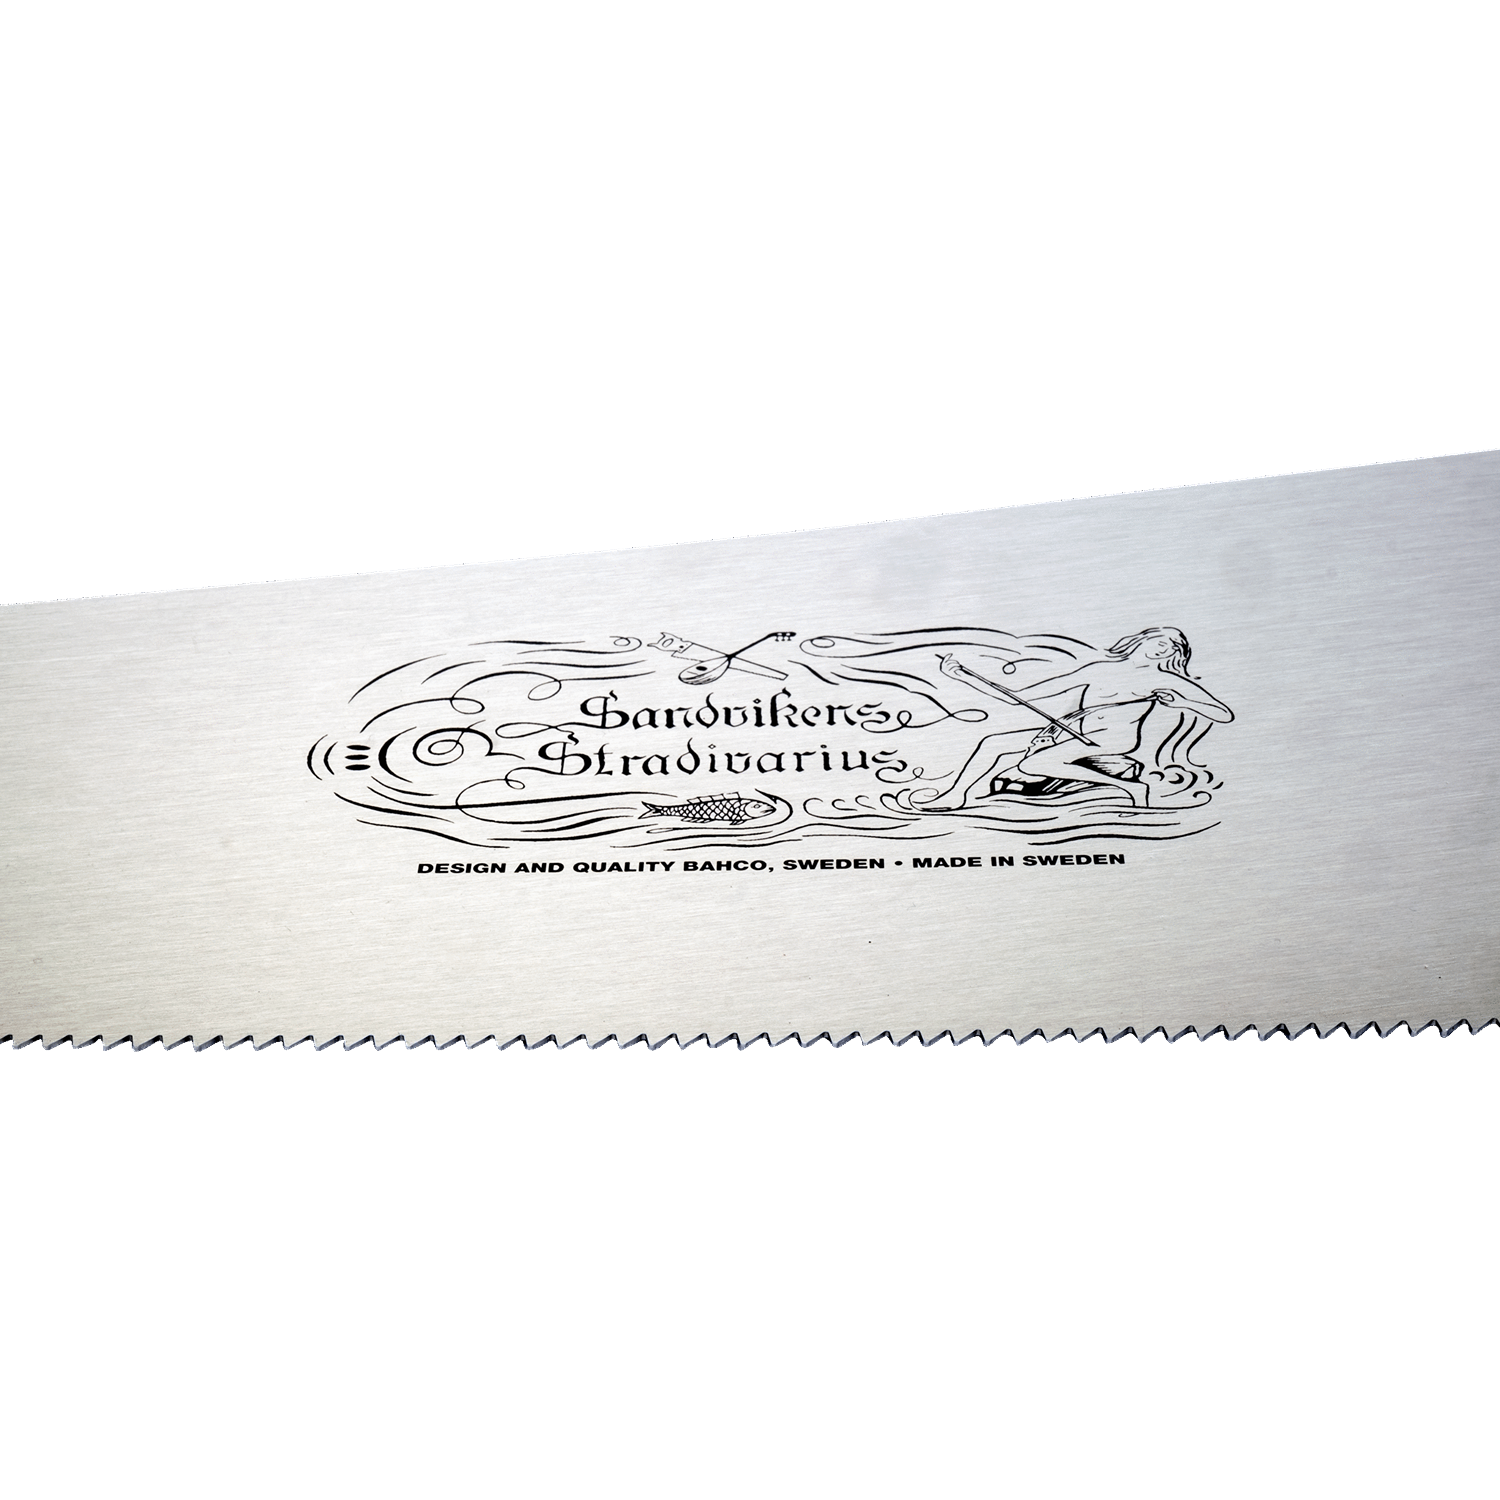 BAHCO 296 Musical Handsaw with Wooden Handle - 750mm - Premium Handsaw from BAHCO - Shop now at Yew Aik.